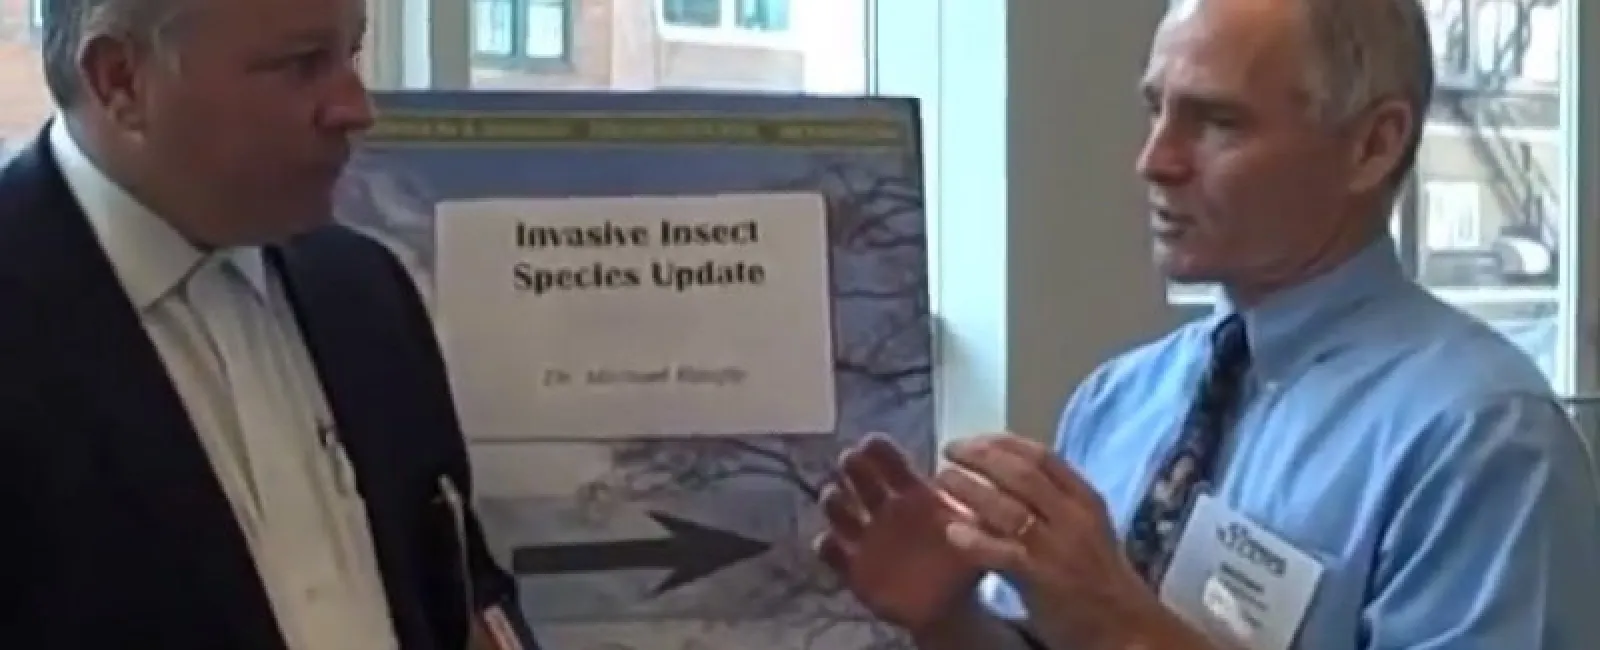 Dr. Michael Raupp on Invasive Insects TCI Expo 2010